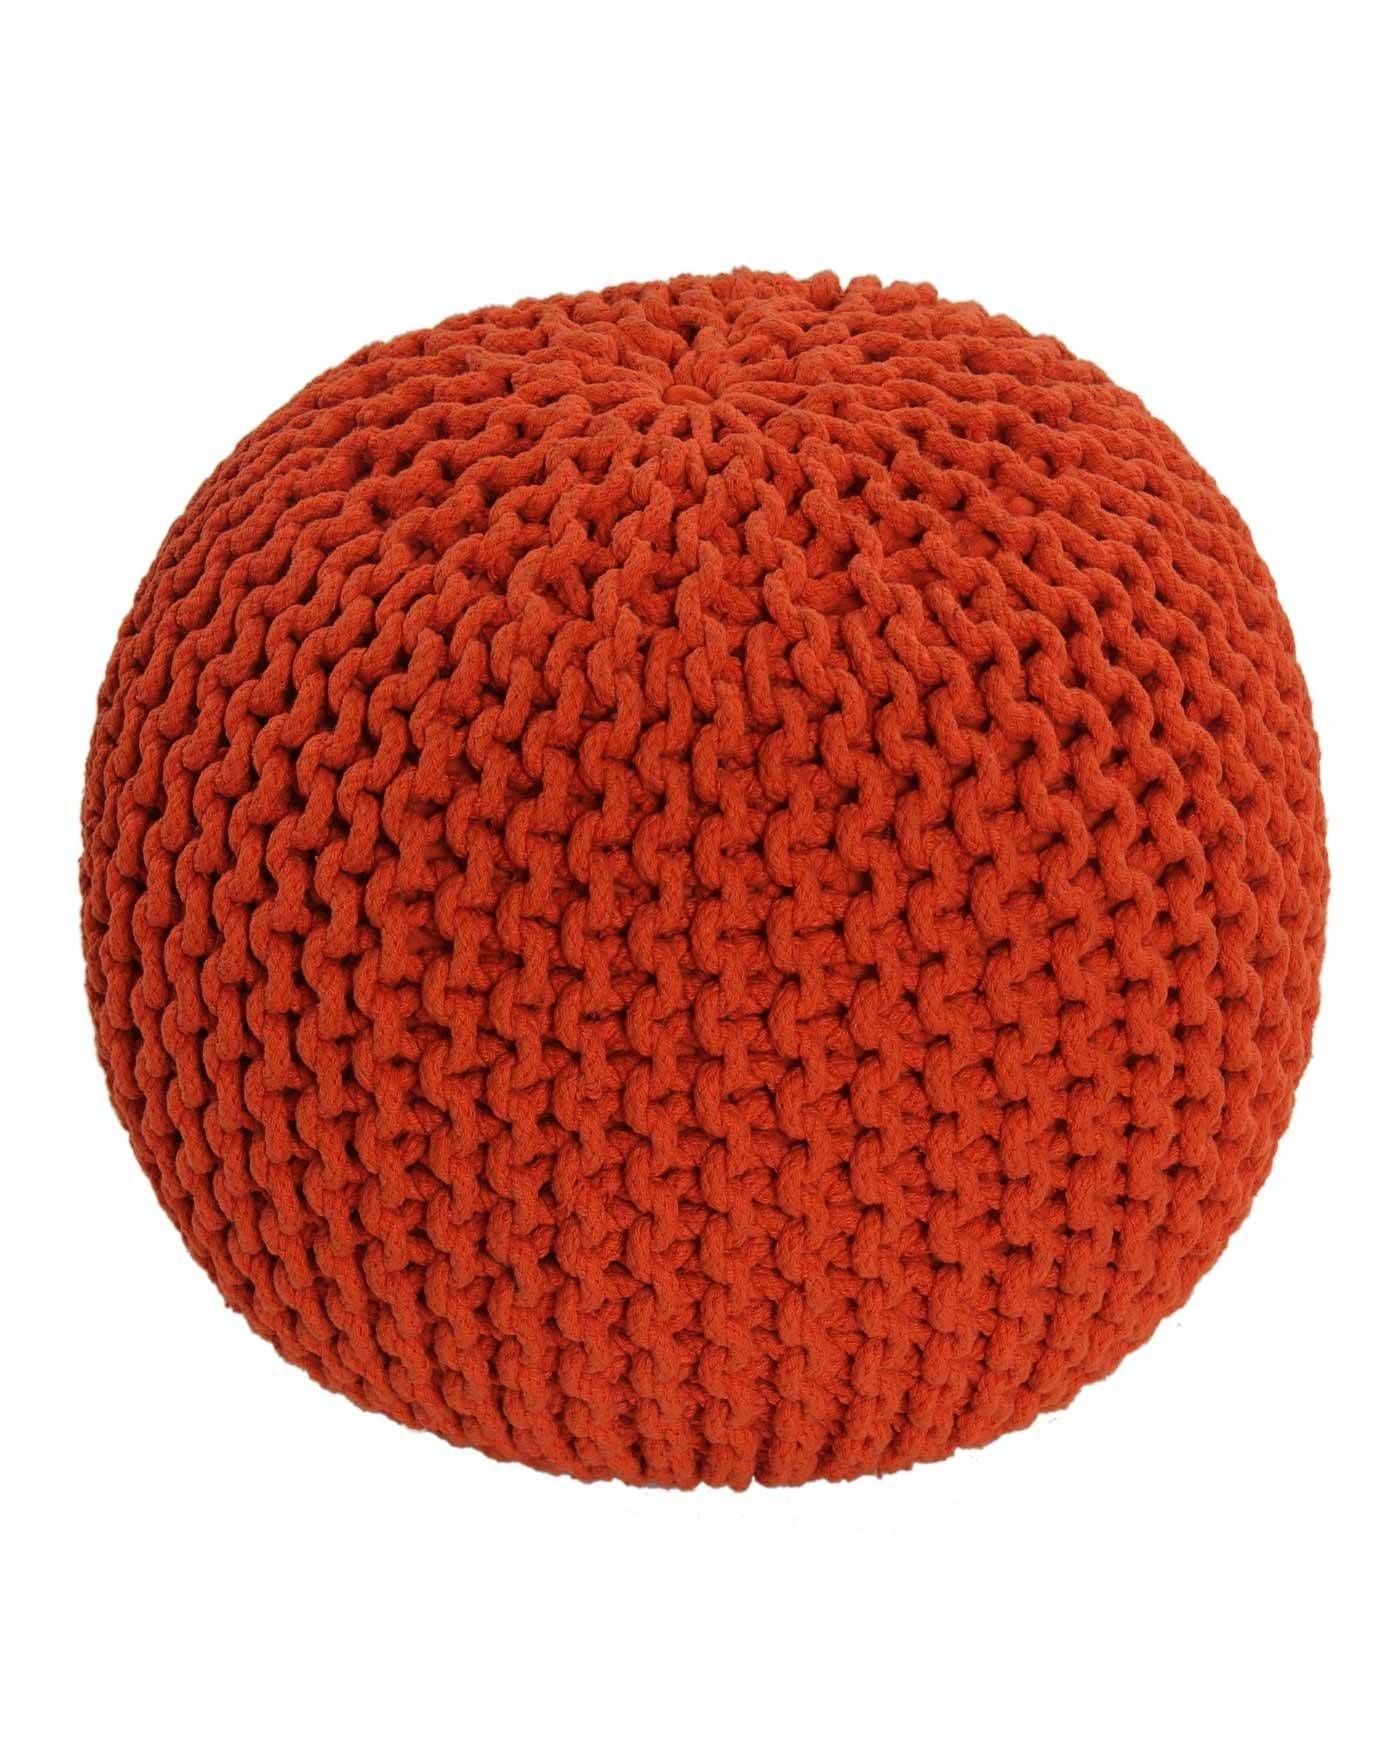 Knitted Pouffe | Knitted Footstool | Pouf | Knitted Pod Throughout Footstools And Pouffes (Photo 1 of 30)